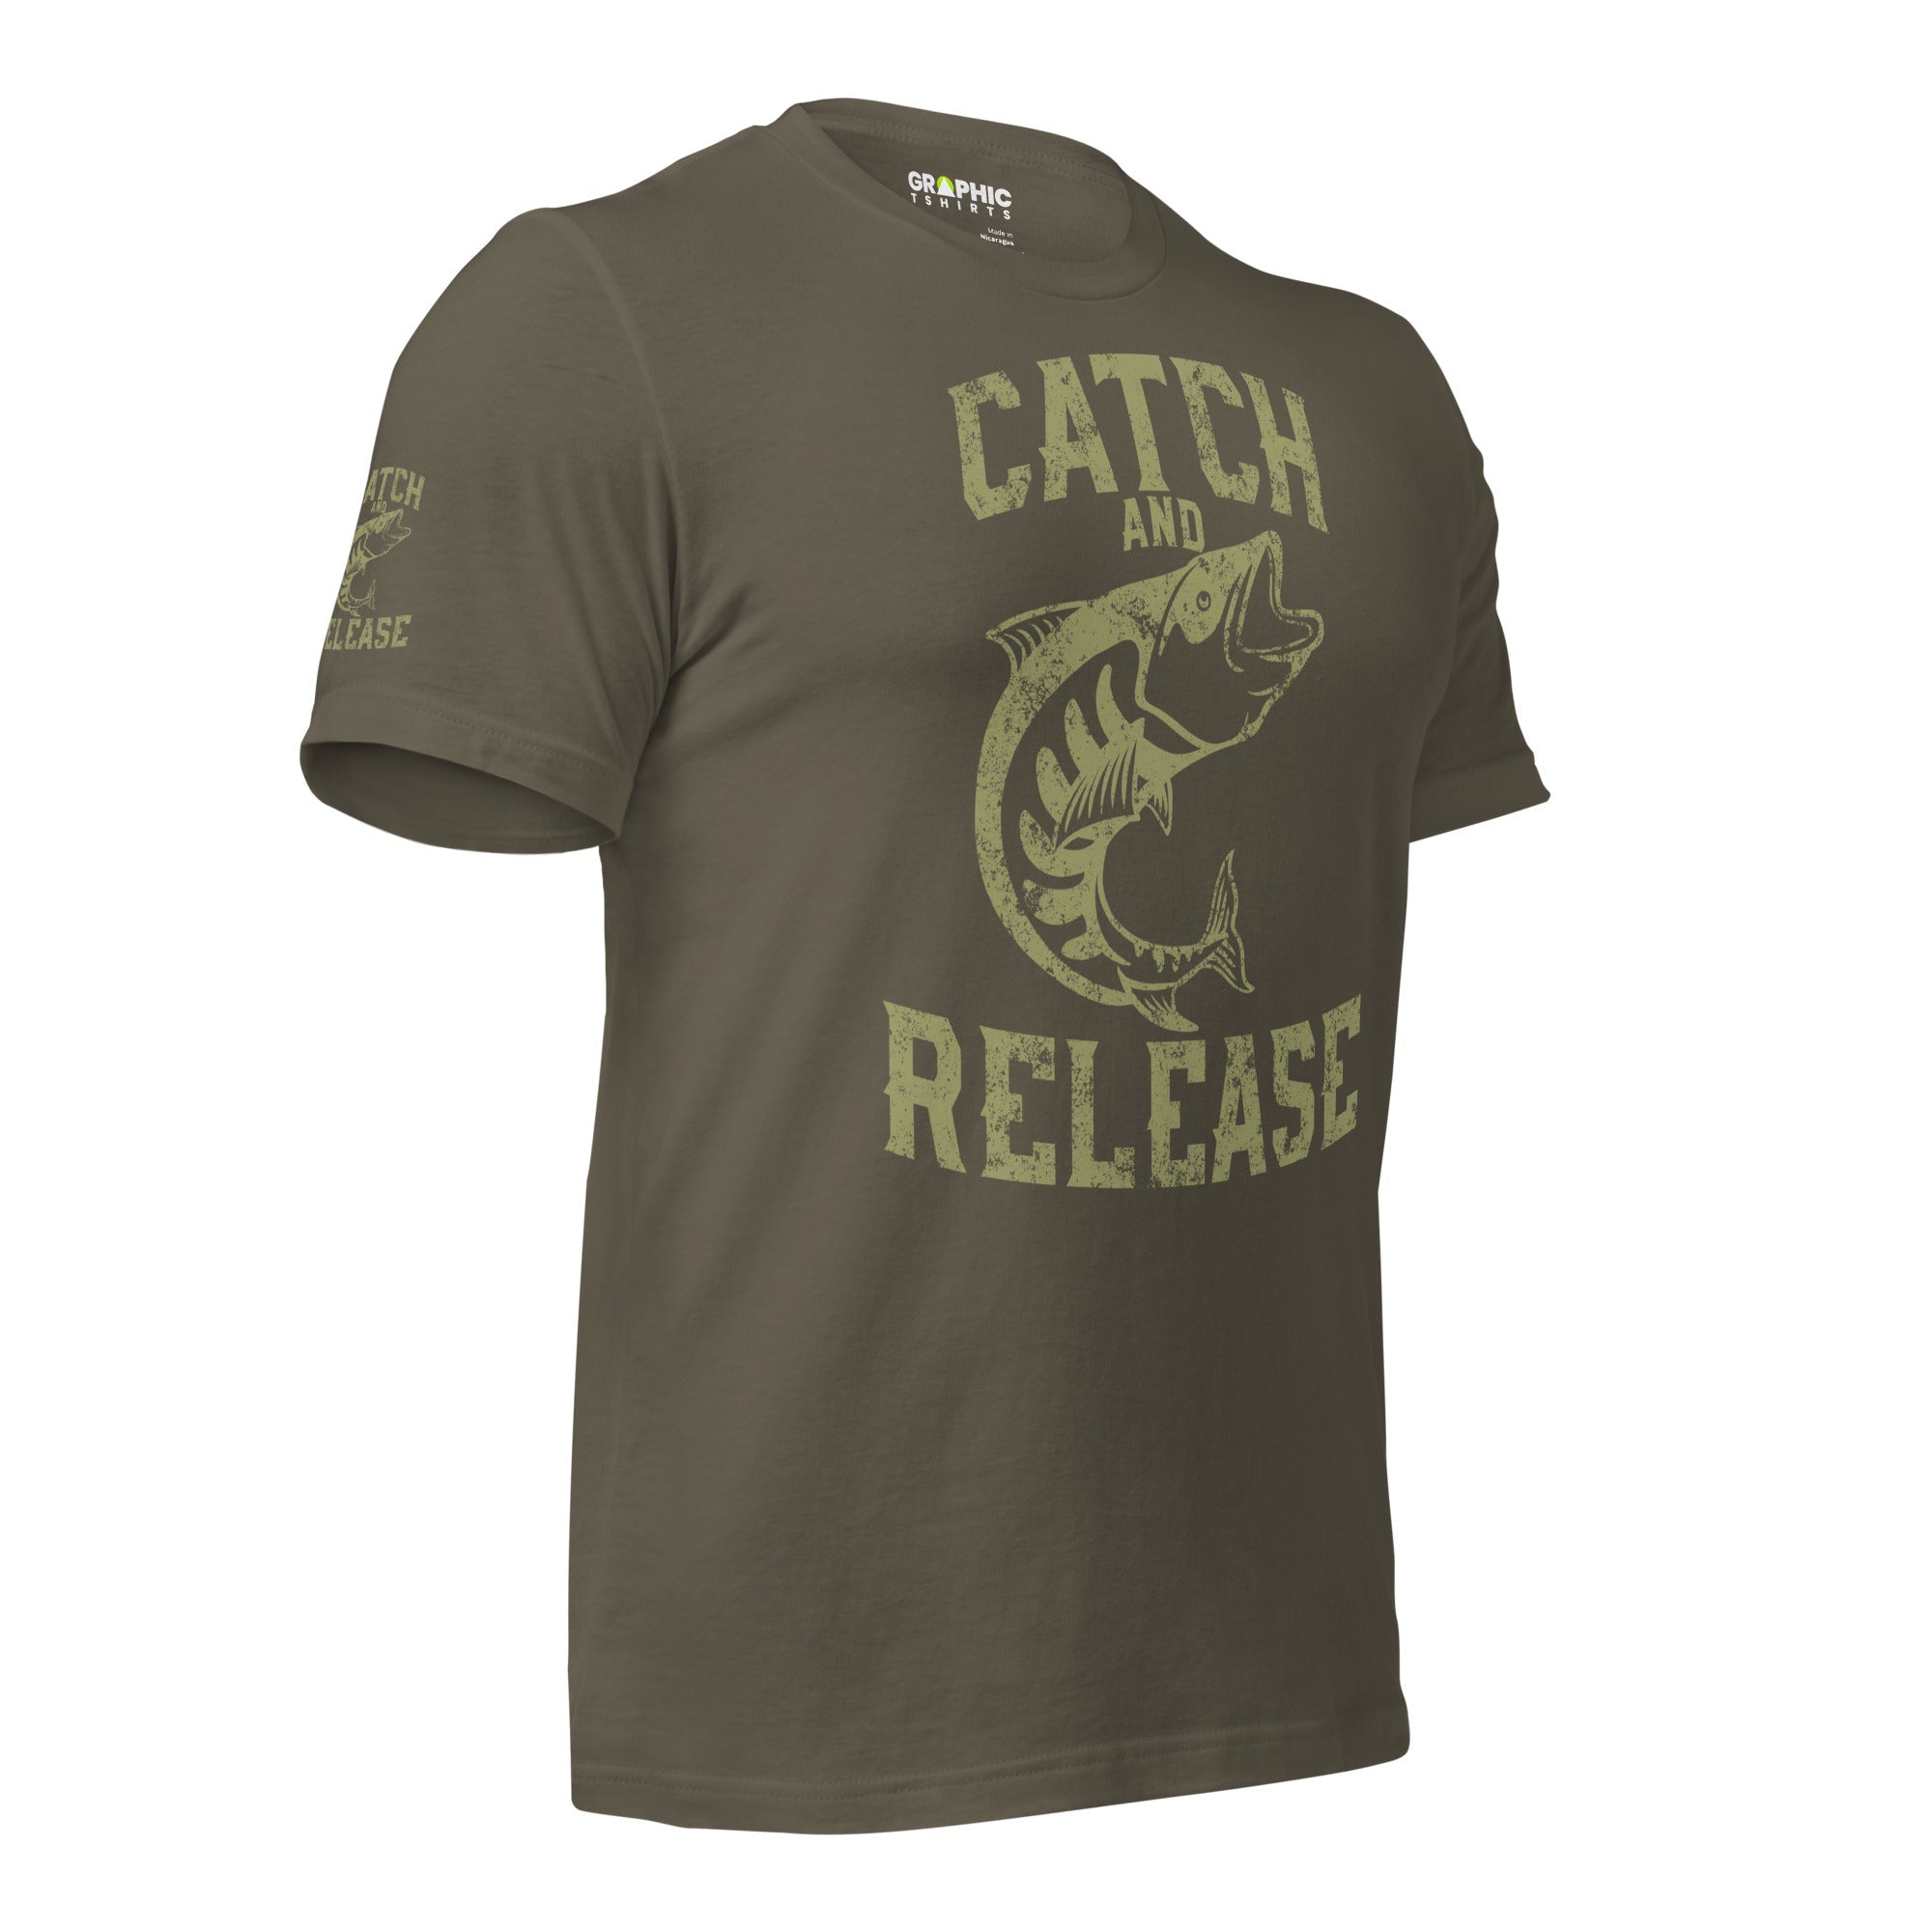 Unisex Staple T-Shirt - Catch And Release - GRAPHIC T-SHIRTS